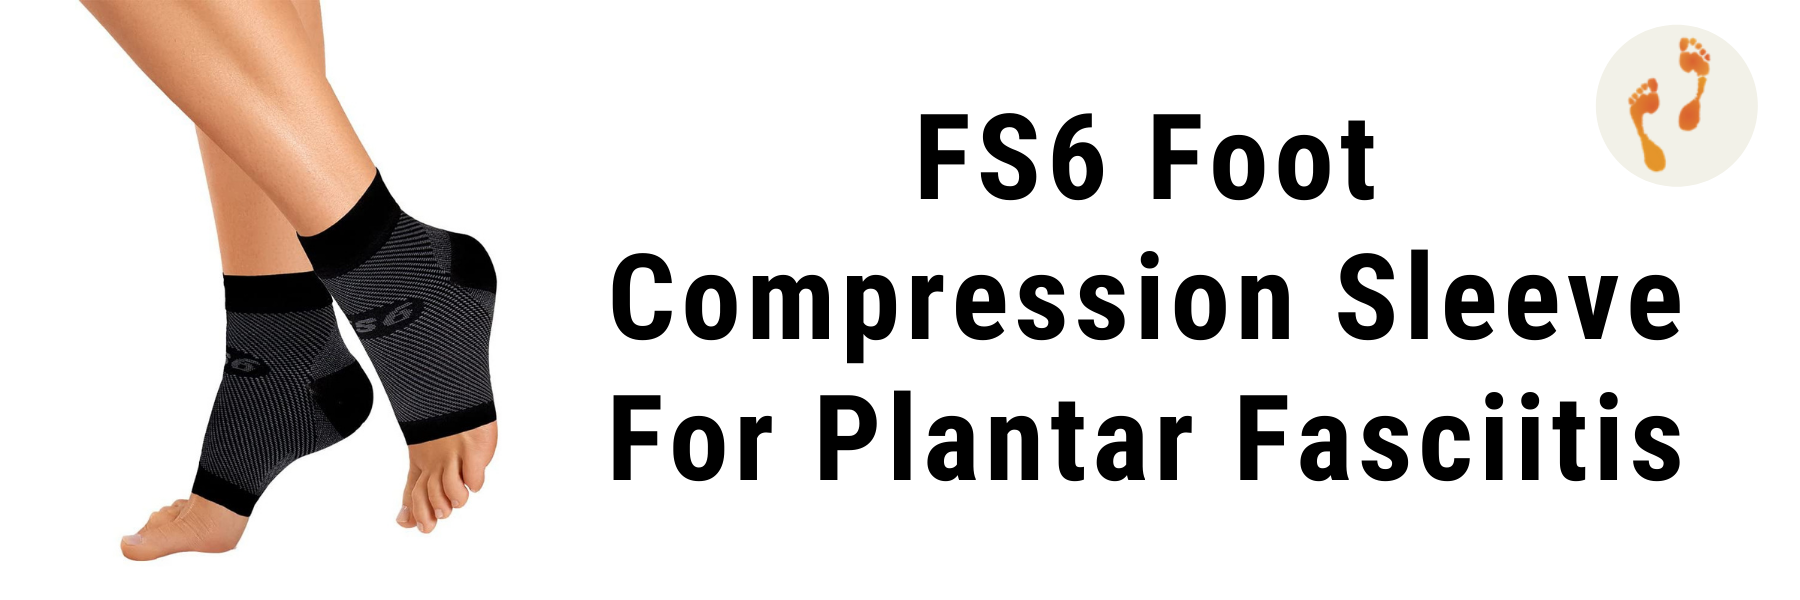 Compression garments that do not compress the foot and heel area